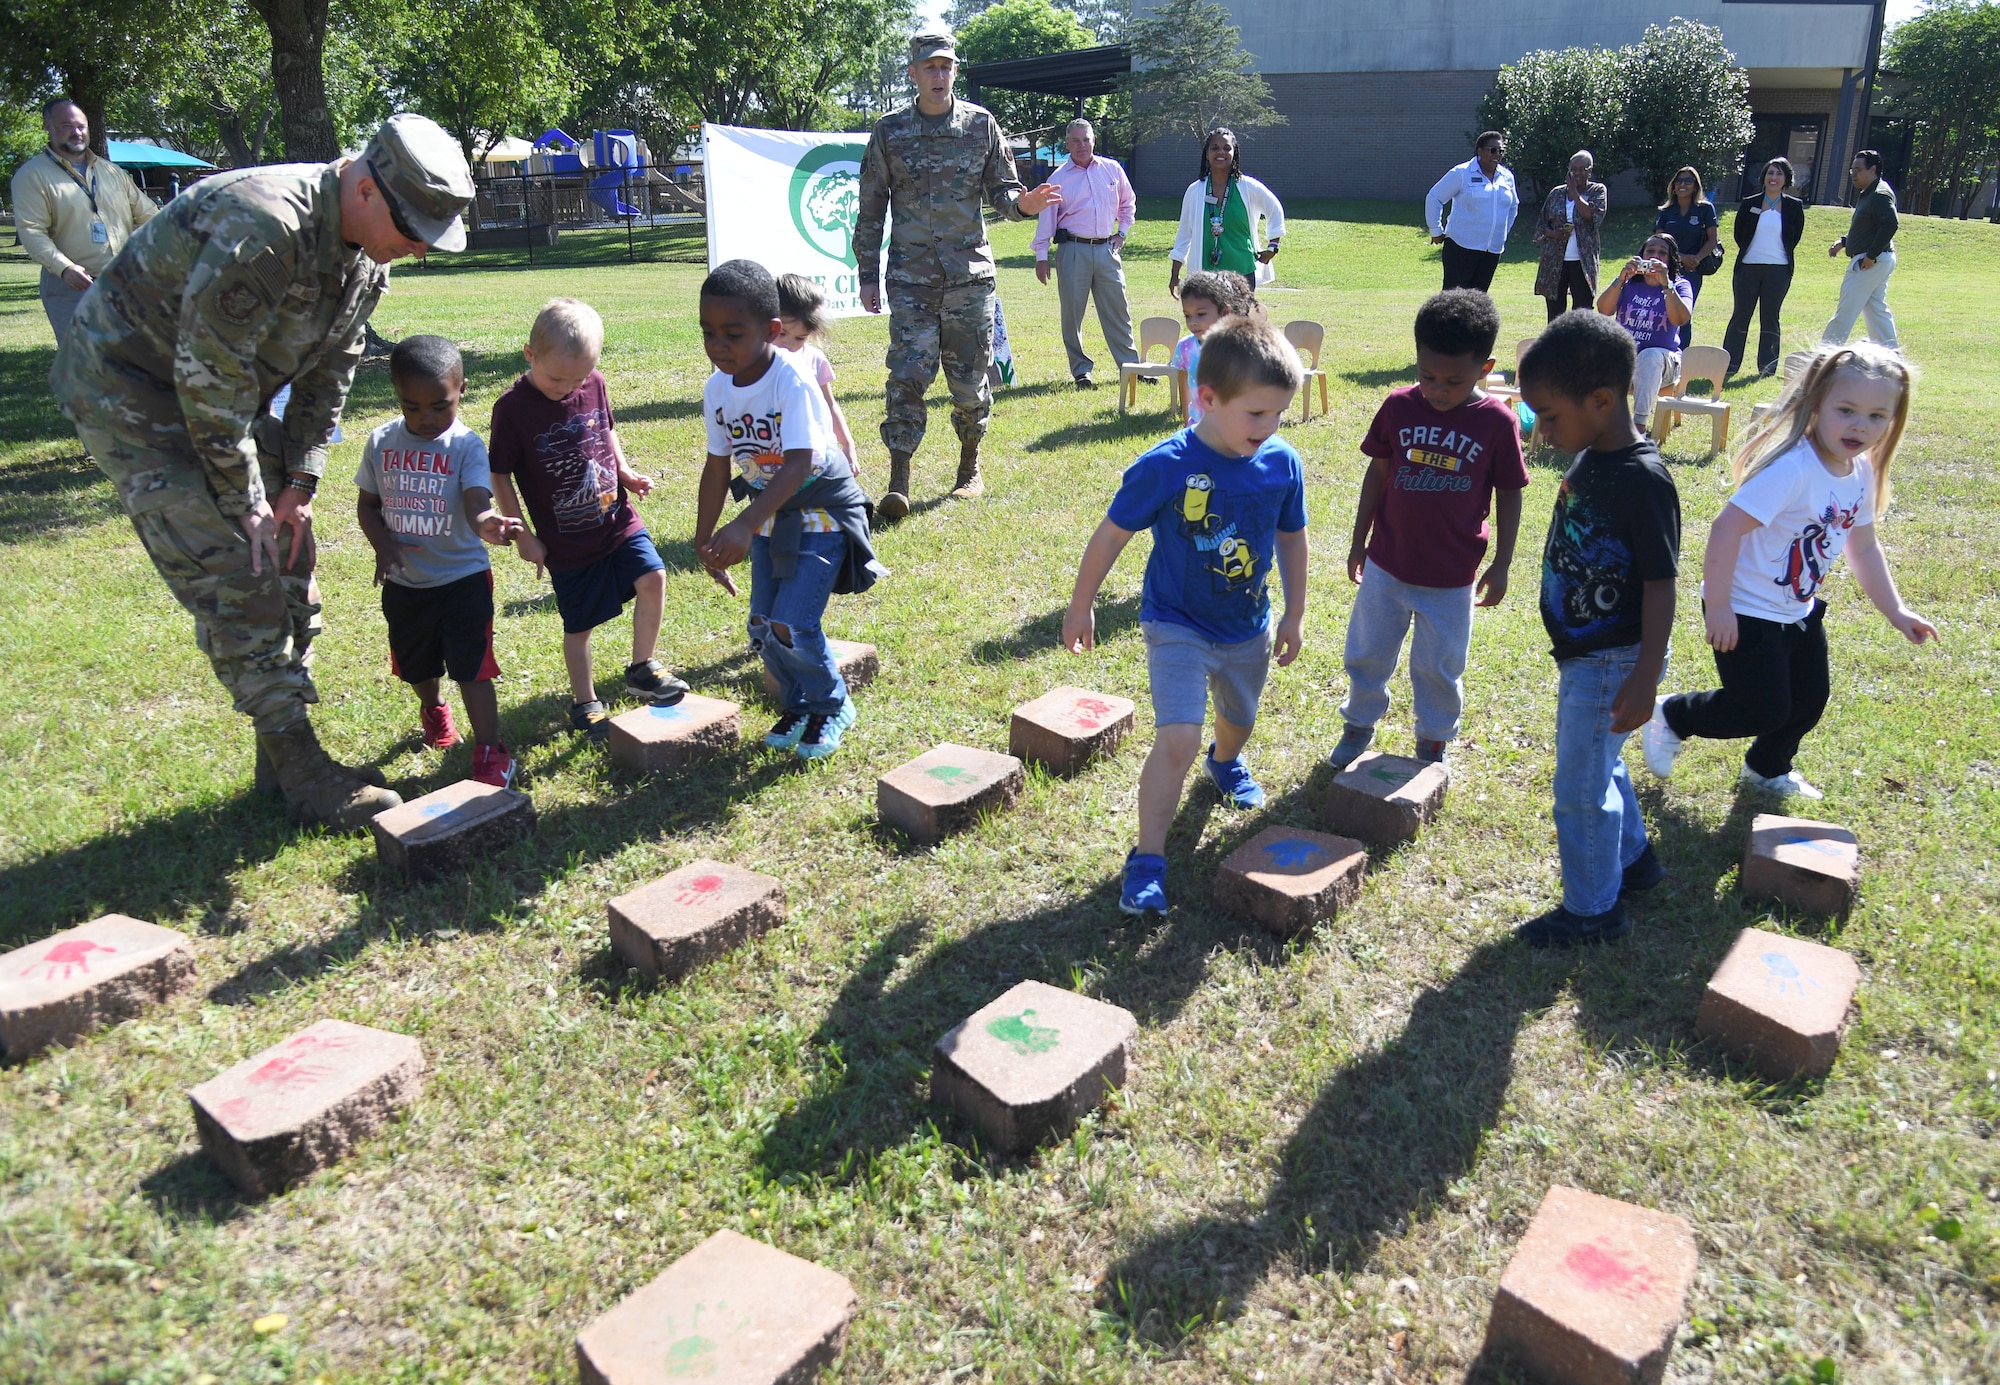 U.S. Air Force Col. William Hunter, 81st Training Wing commander, and children from the Keesler Child Development Center view hand painted stones they made for the Arbor Day Celebration at Keesler Air Force Base, Mississippi, April 28, 2022. A tree planting ceremony and a Tree City USA flag presentation also took place at the event. (U.S. Air Force photo by Kemberly Groue)